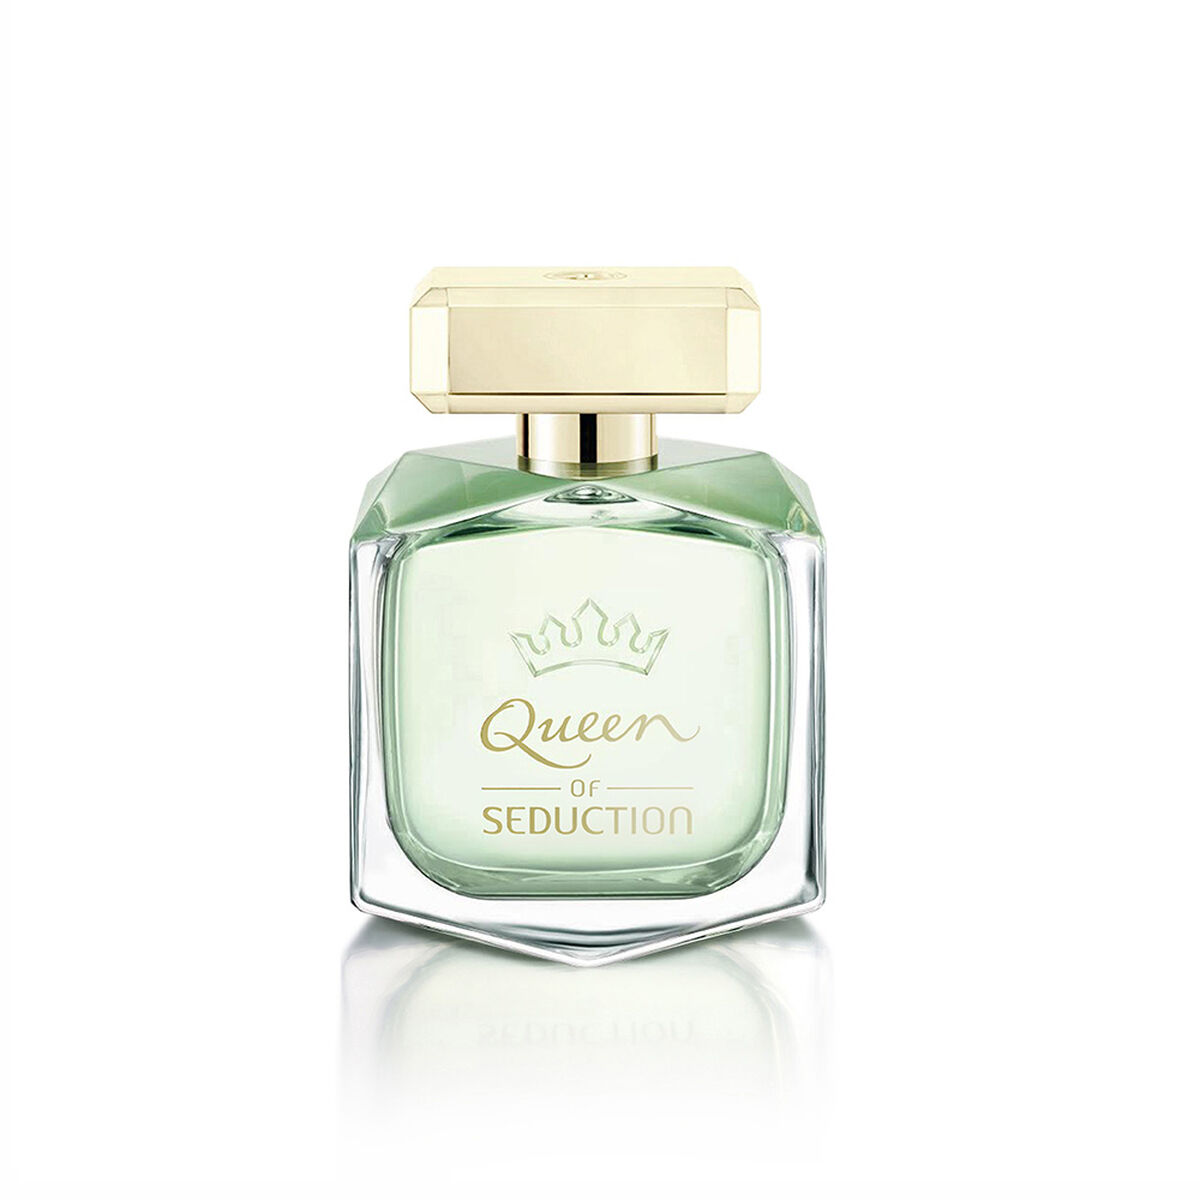 Queen Of Seduction EDT 80 ml + Body Lotion 75 ml